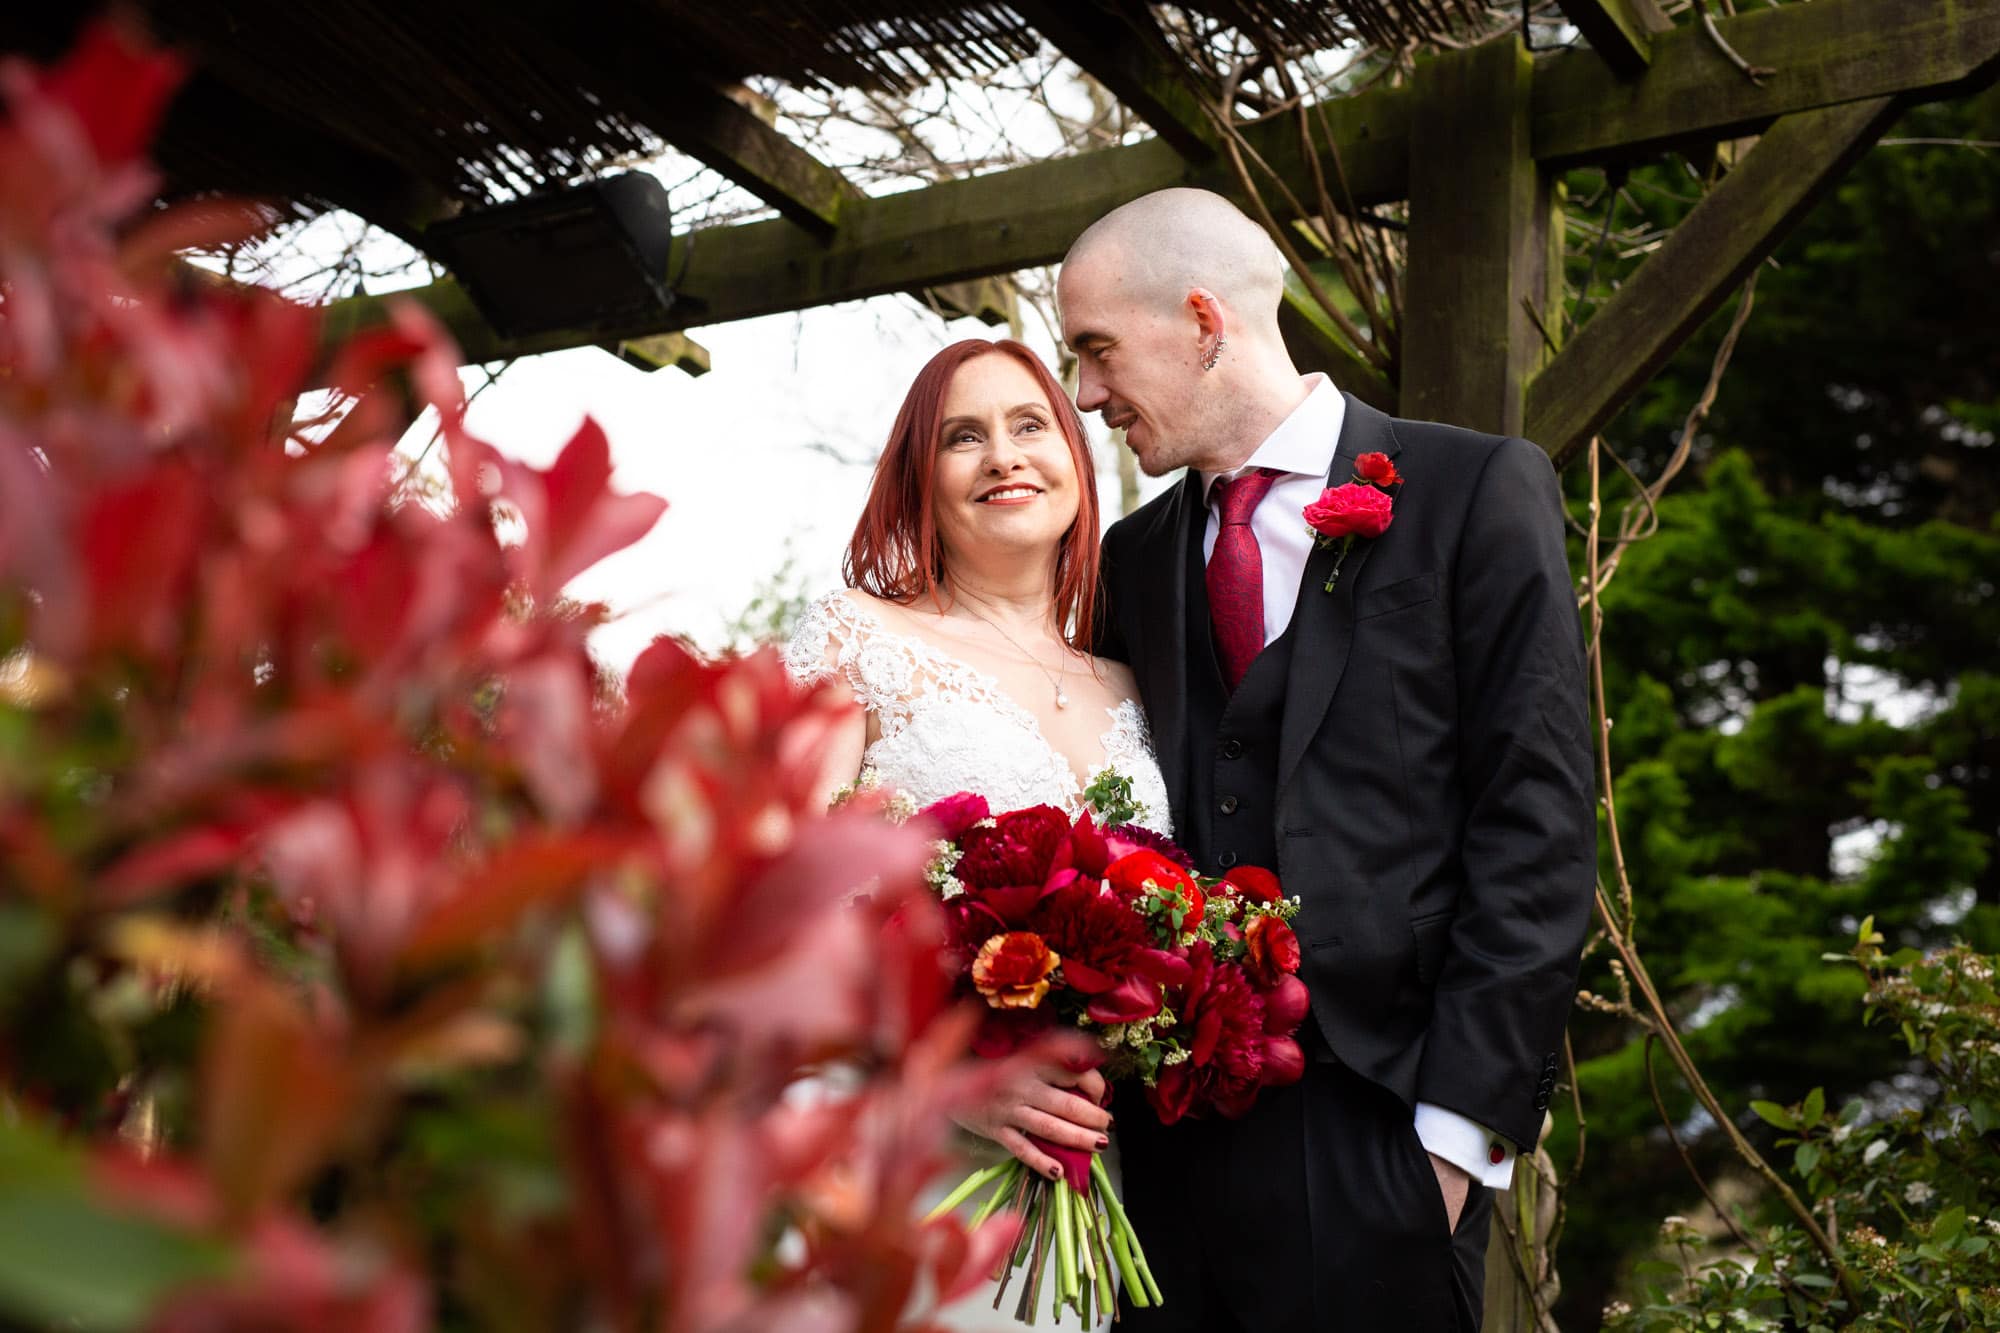 Bromley wedding photography image of couple standing by red spring flowers at Oaks Farm Weddings venue